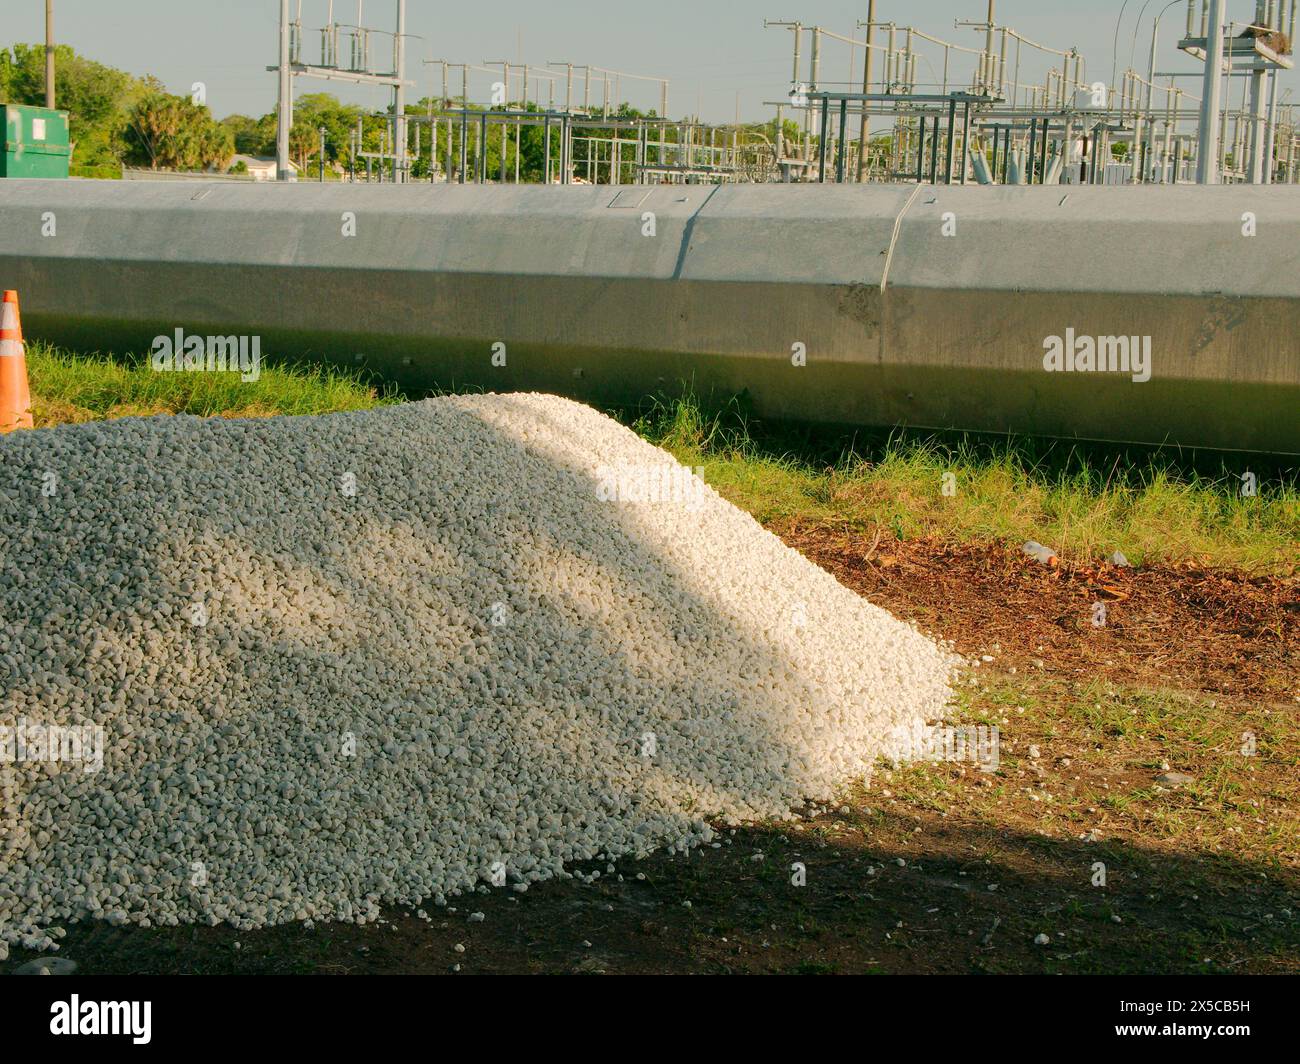 Wide view over green grass to pile of white stones and laying on the ground a steel Utility Pole sections with a Electric Substation in back. Palm Stock Photo